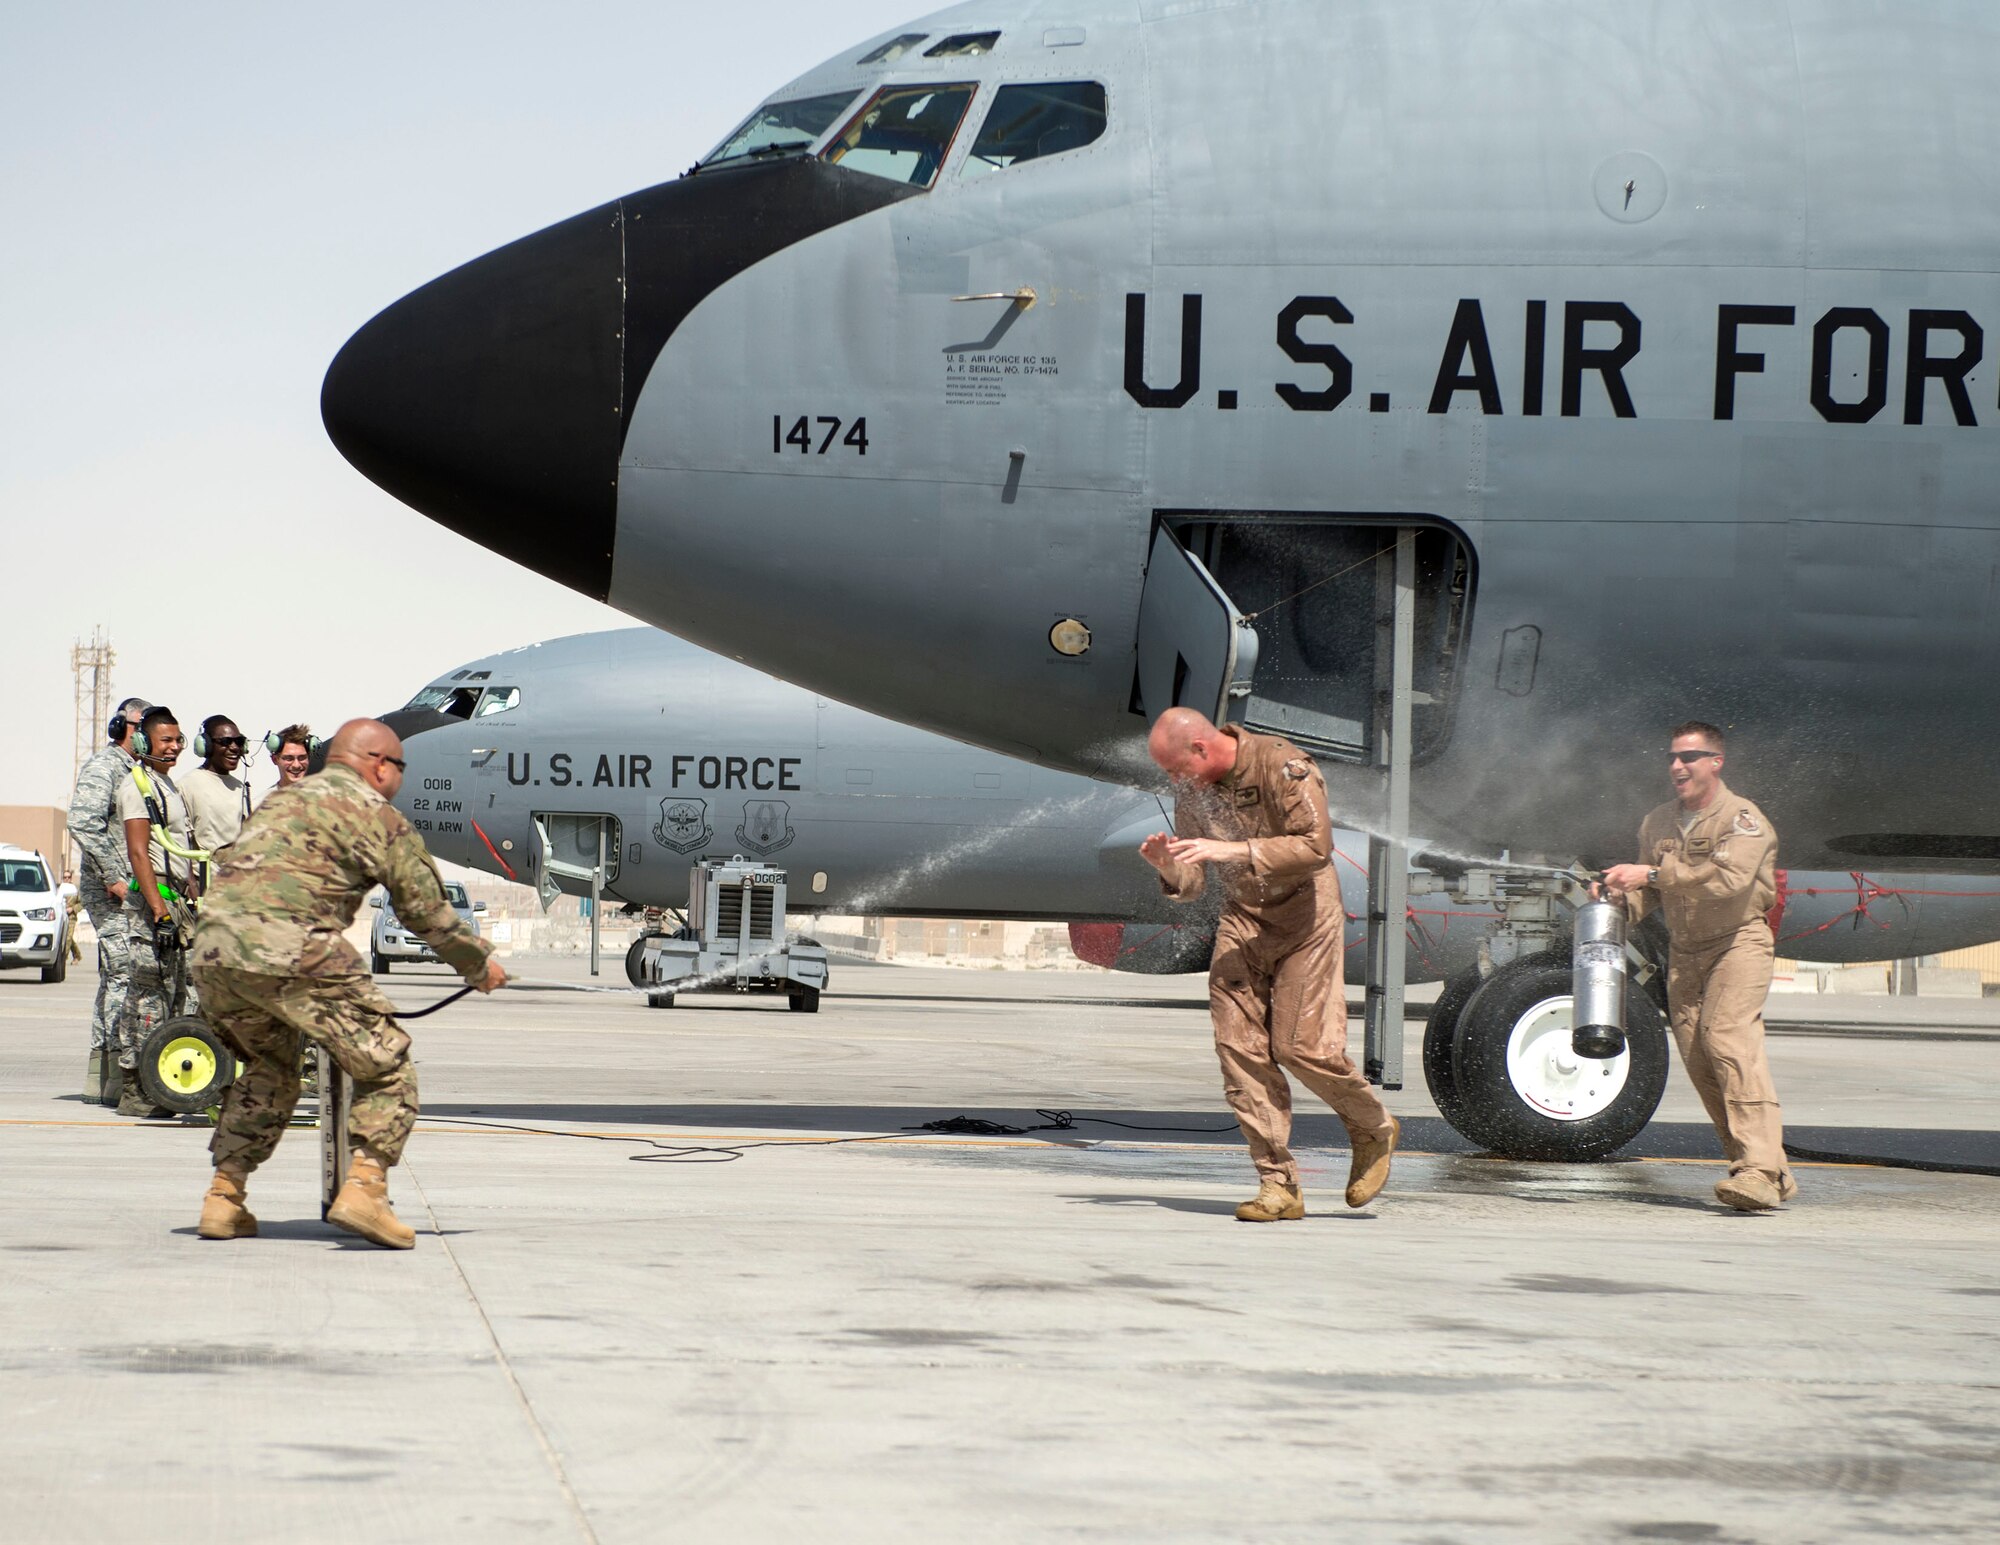 U.S. Air Force Brig. Gen. Darren James, wing commander of the 379th Air Expeditionary Wing, is hosed down with water by follow airmen with the 379th AEW at Al Udeid Air Base, Qatar, May 29, 2017. James just completed his fini-flight which is a time honored aviation tradition that marks the end of his flying status as wing commander of the 379th AEW. During James’ time as wing commander, he flew over 325 hours and 40 sorties.  (U.S. Air Force photo by Tech. Sgt. Amy M. Lovgren)